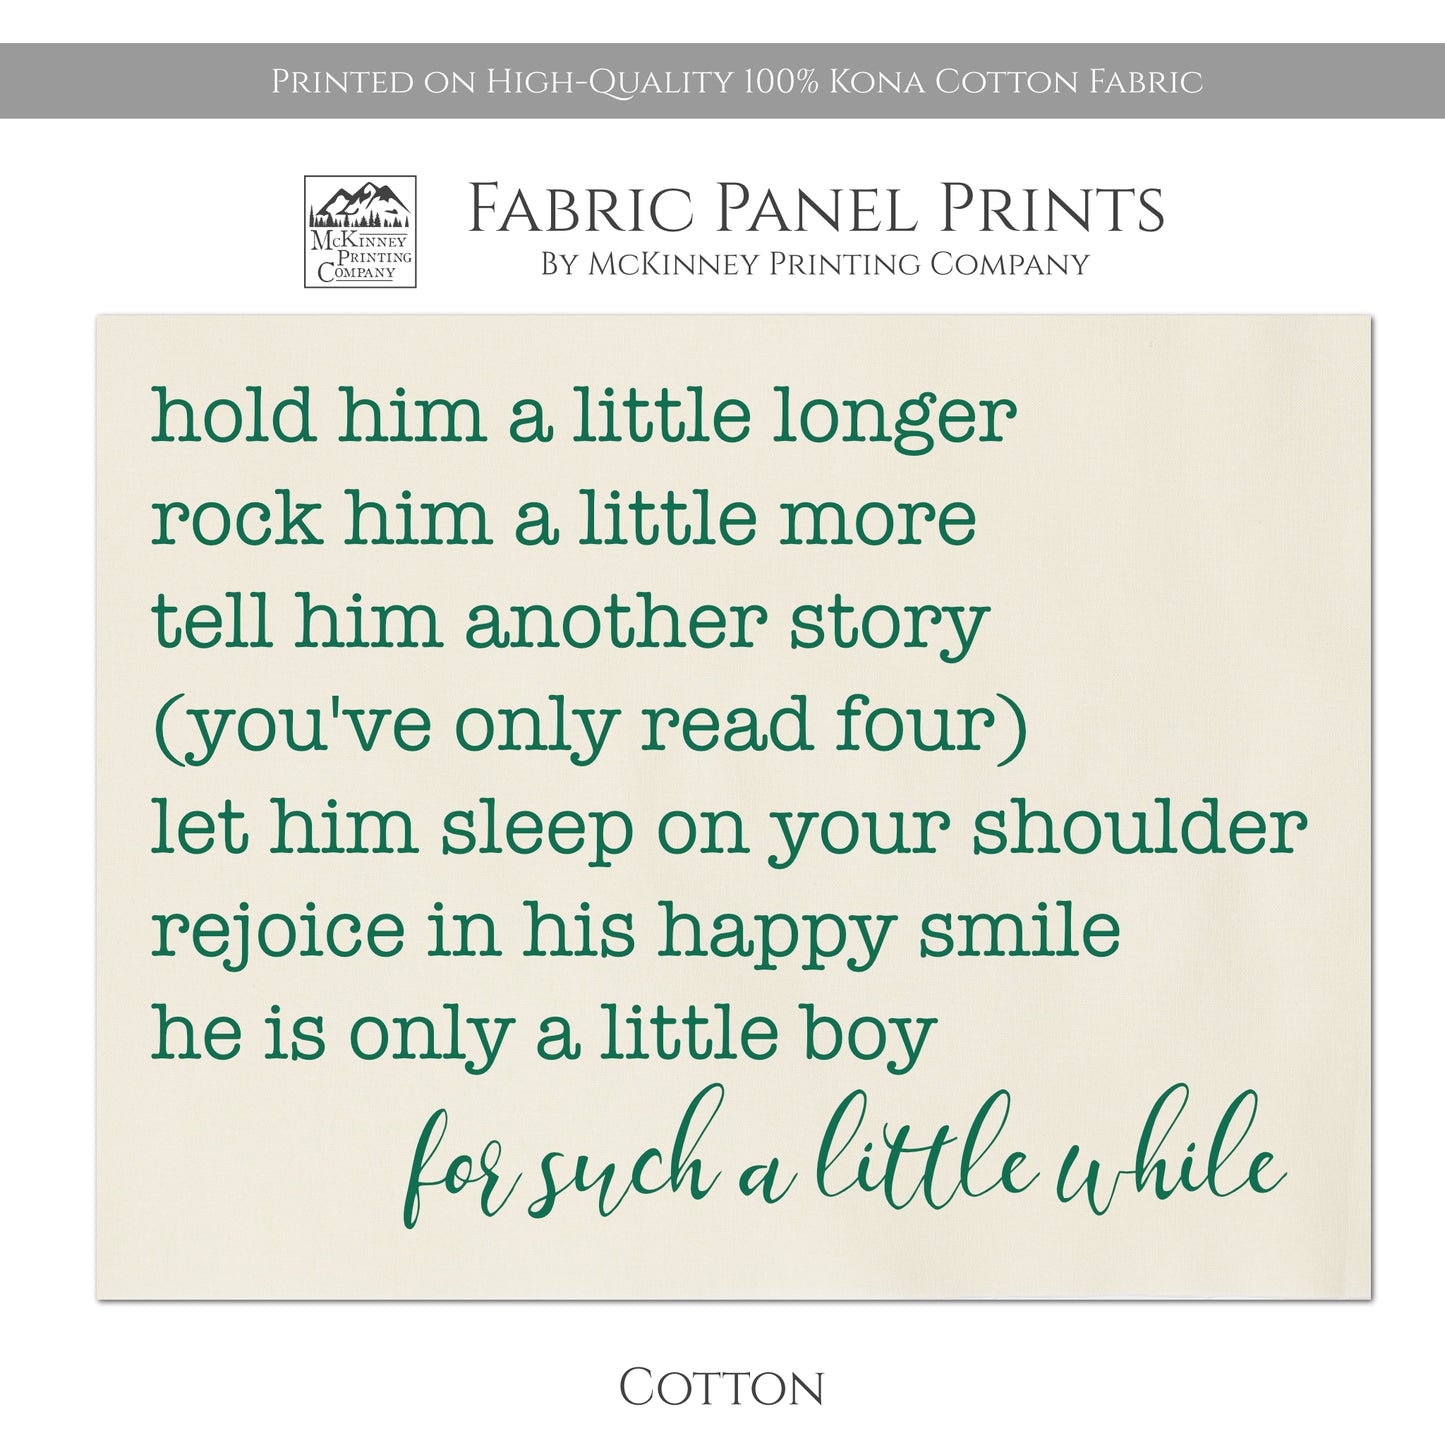 Hold him a little longer, rock him a little more, tell him another story, you've only read four), let him sleep on your shoulder, rejoice in his happy simile, he is only a little boy, for such a little while - Baby Fabric Panel - Kona Cotton Fabric